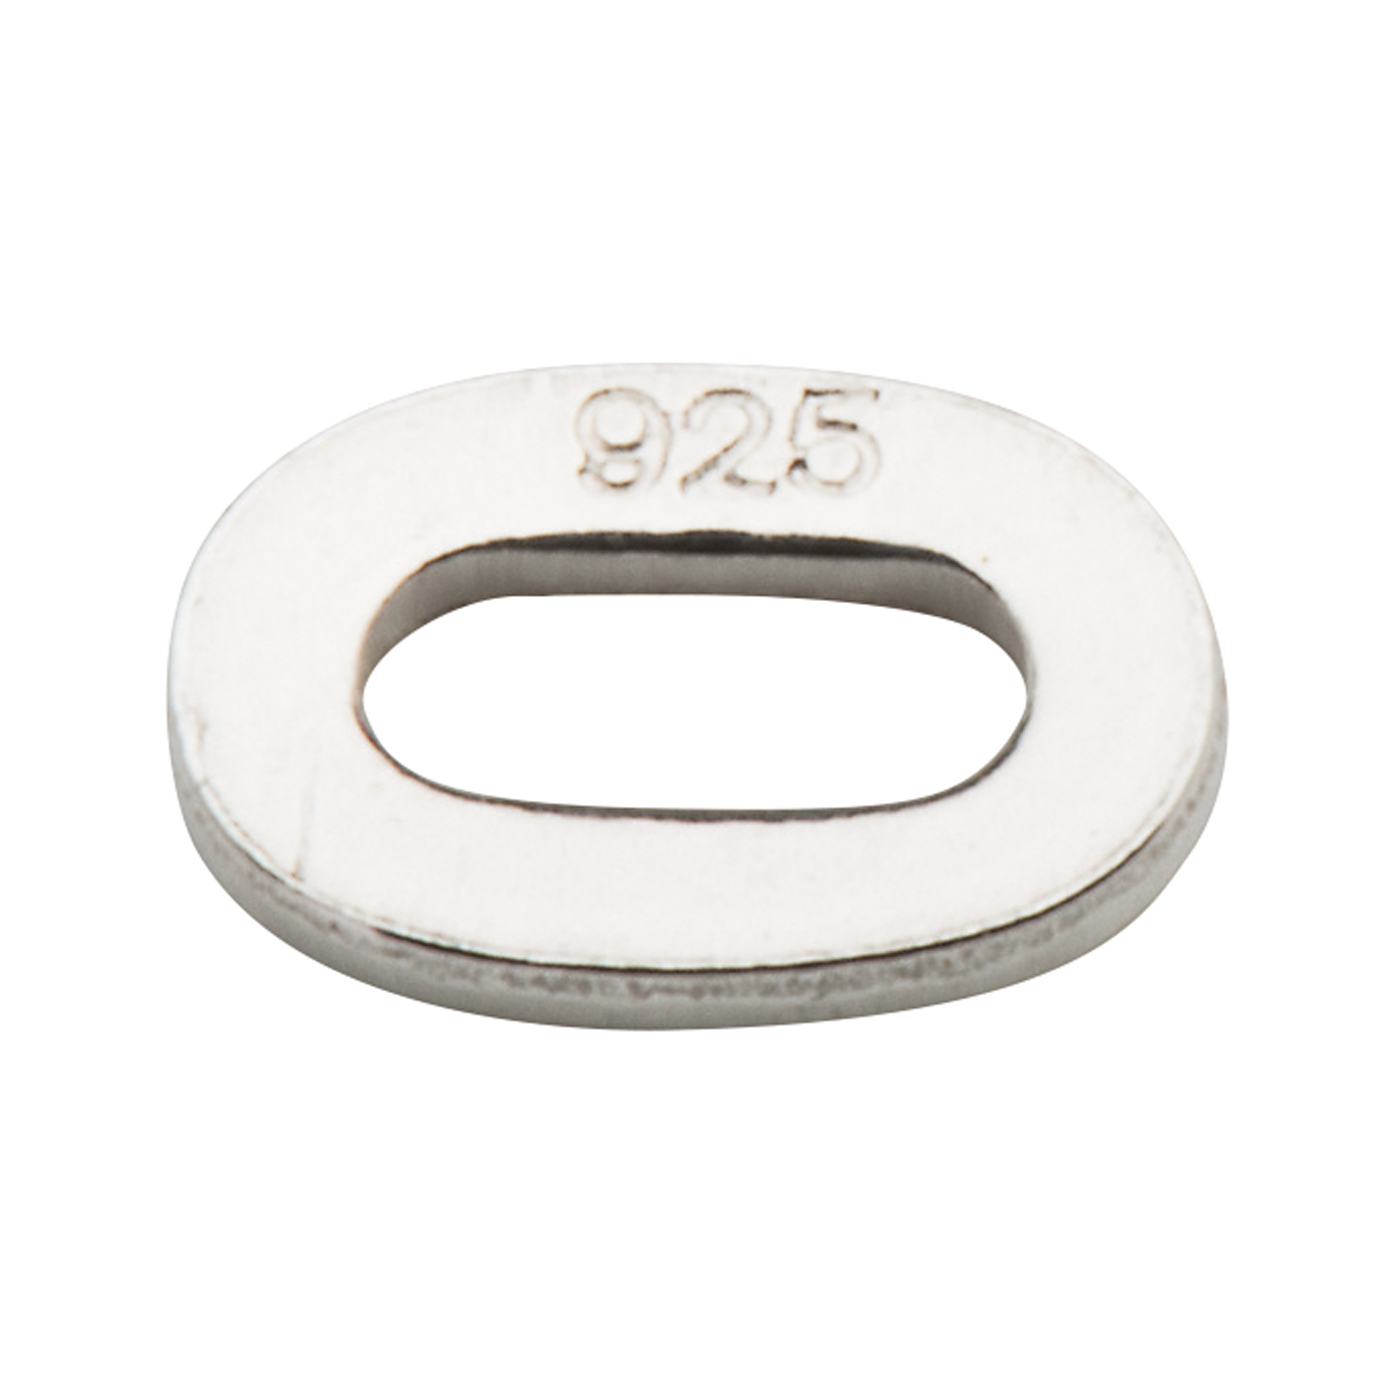 Chain Tag, Oval, 925Ag, 4.9 x 3.6 mm - 10 pieces